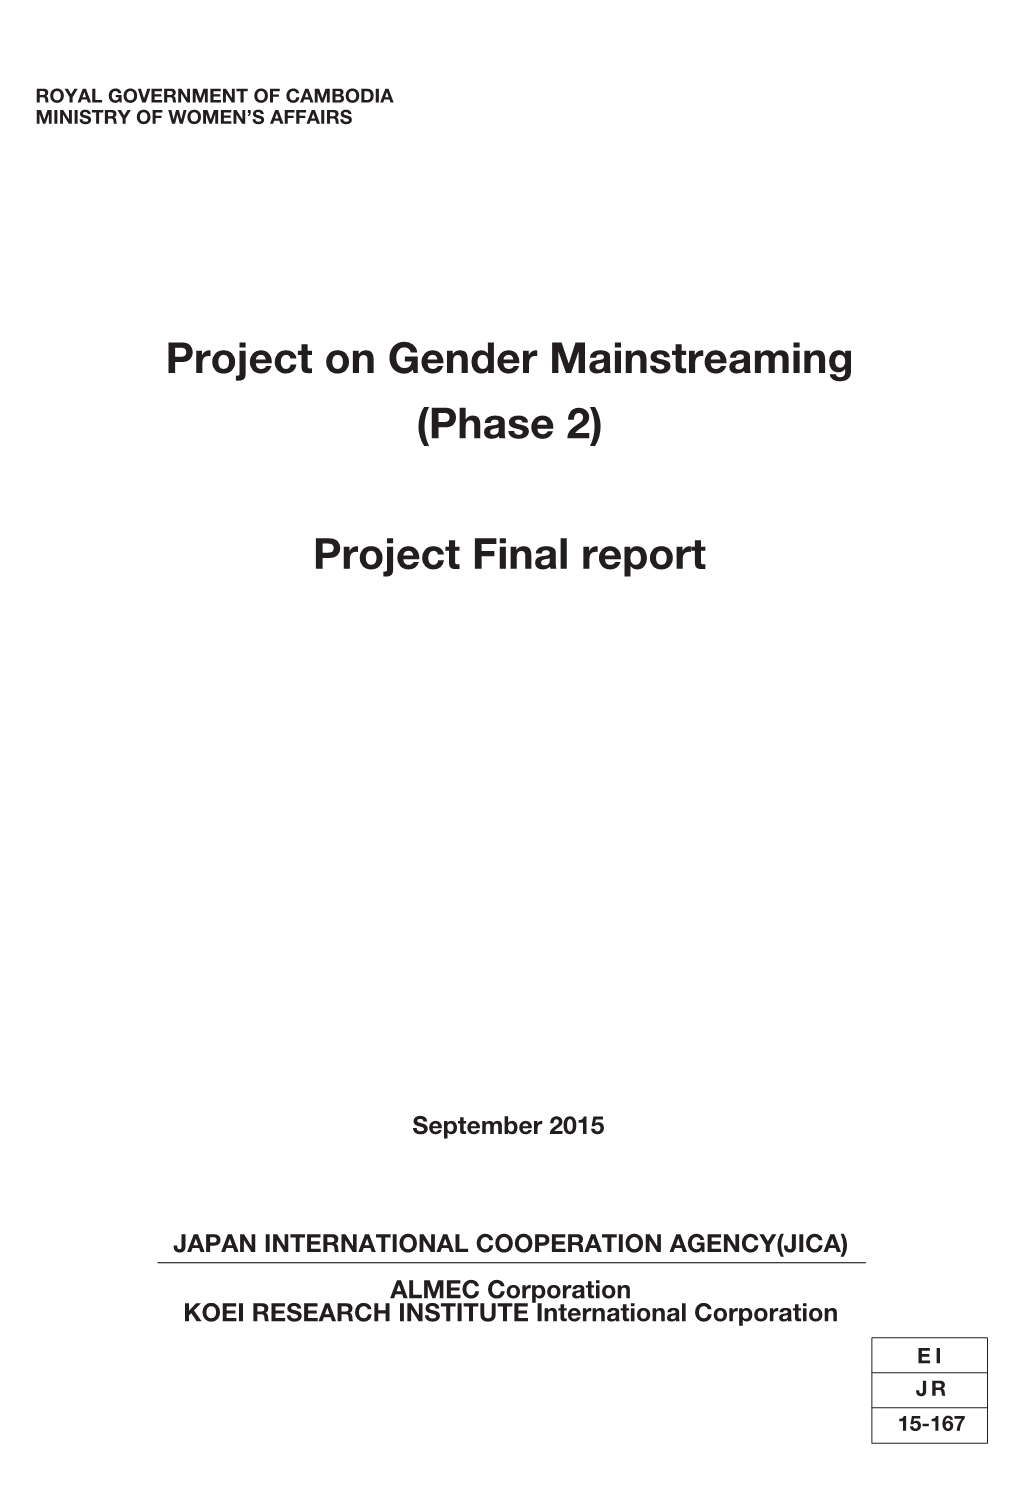 Project on Gender Mainstreaming (Phase 2) Project Final Report September 2015